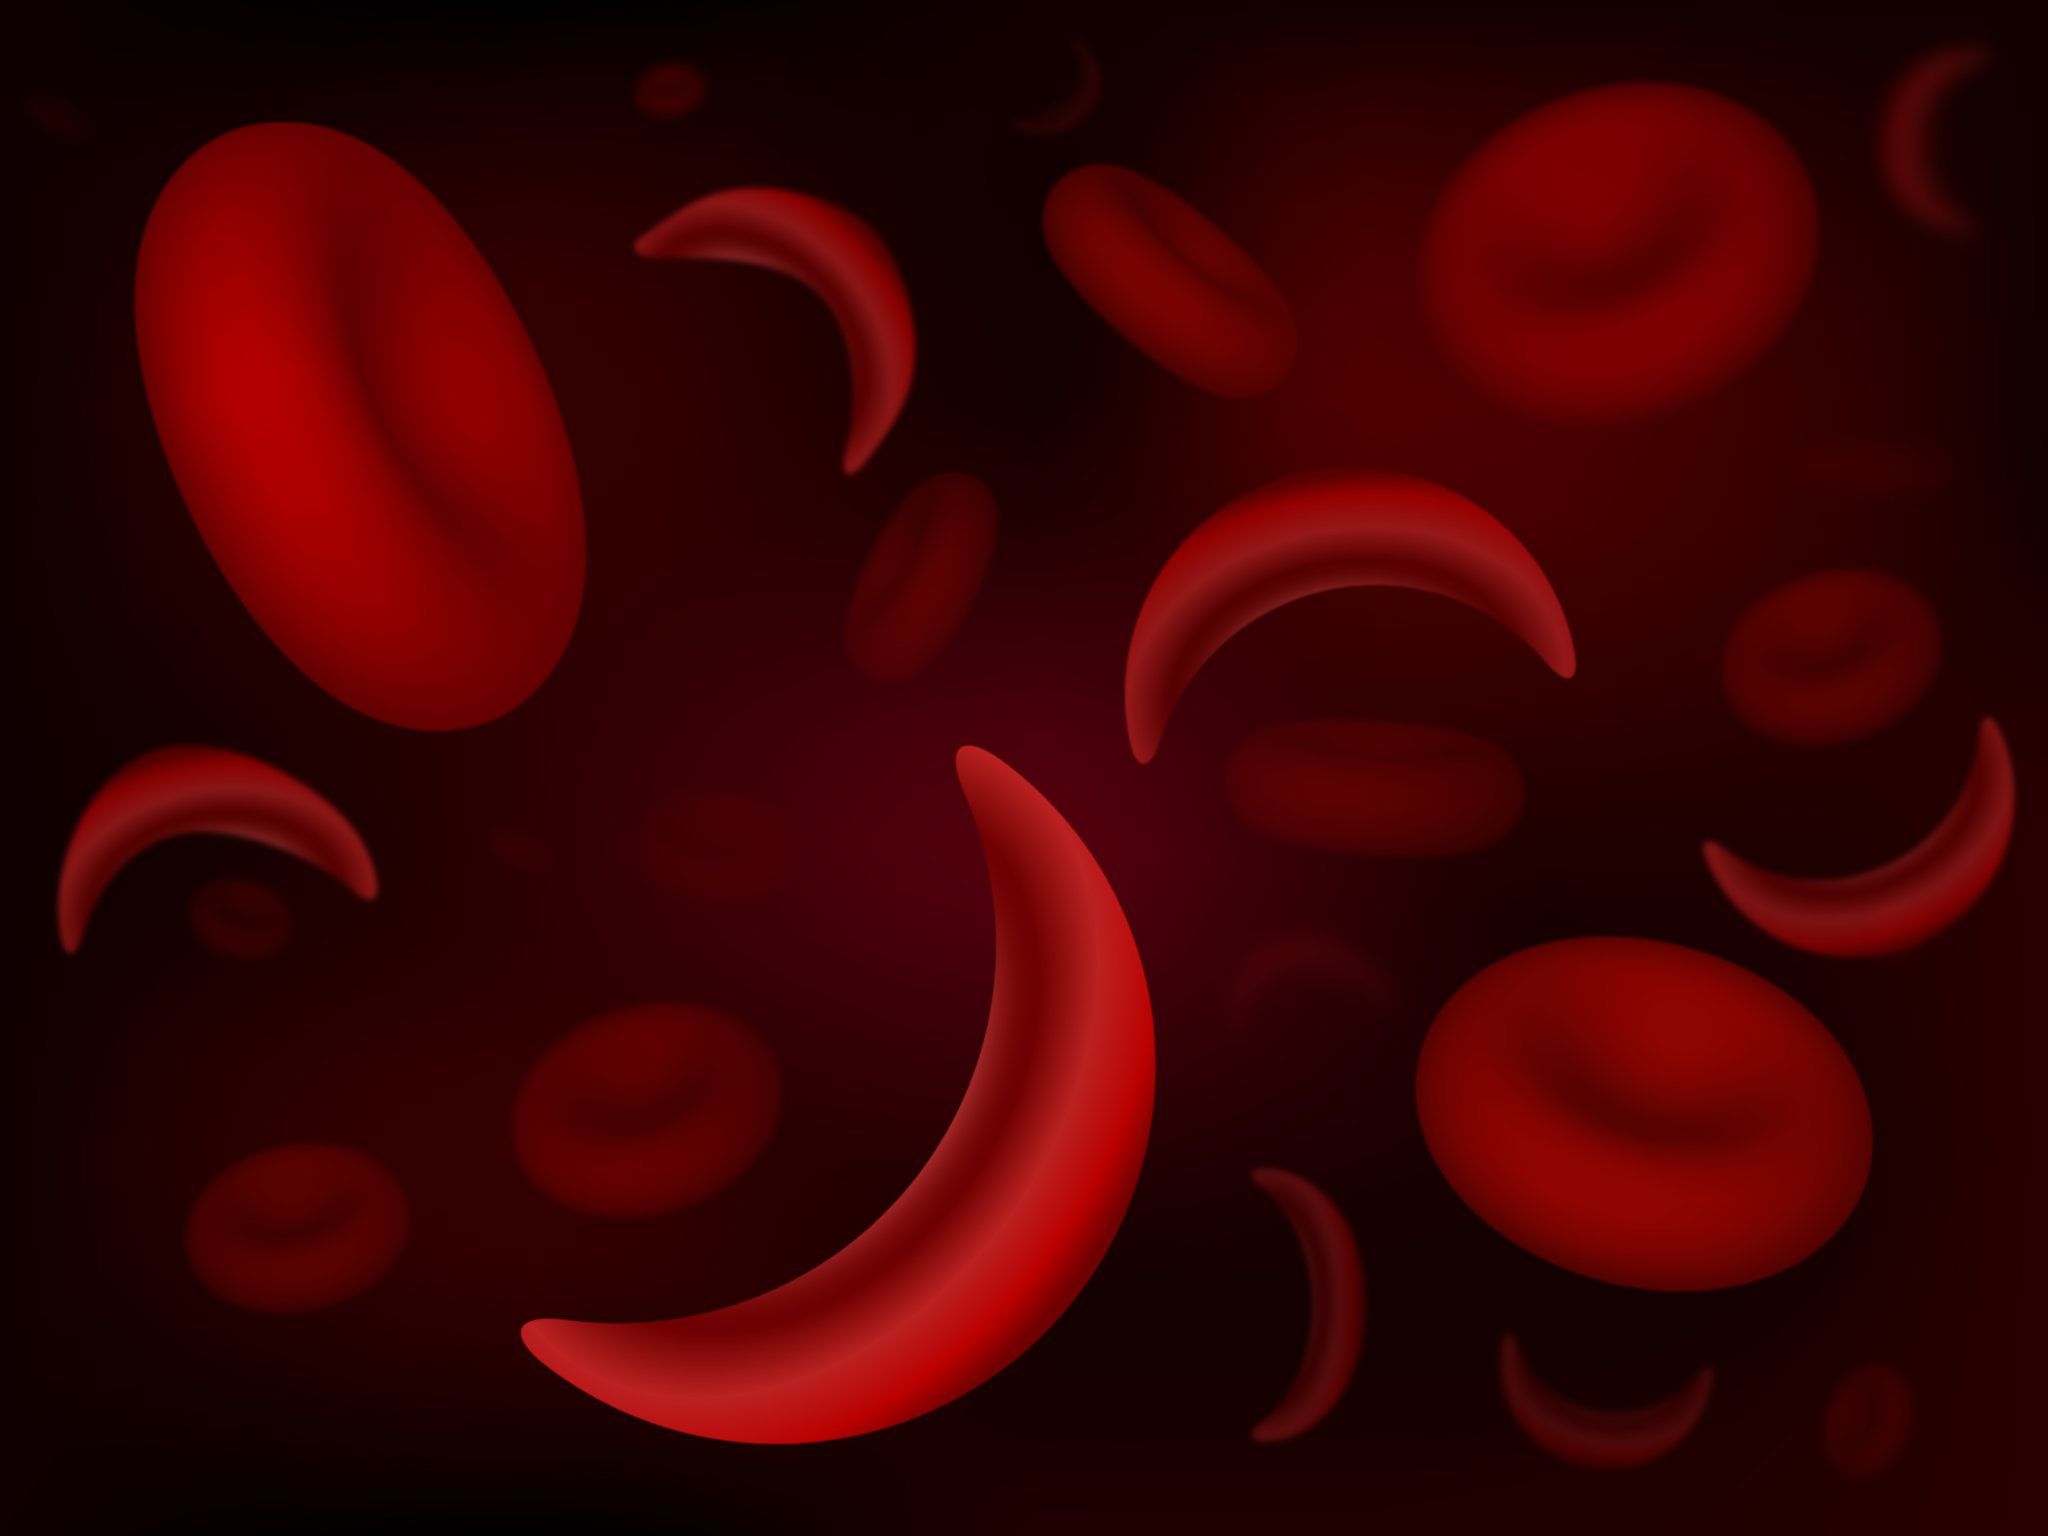 Anemia Wallpaper. Anemia Wallpaper, Anemia Background and